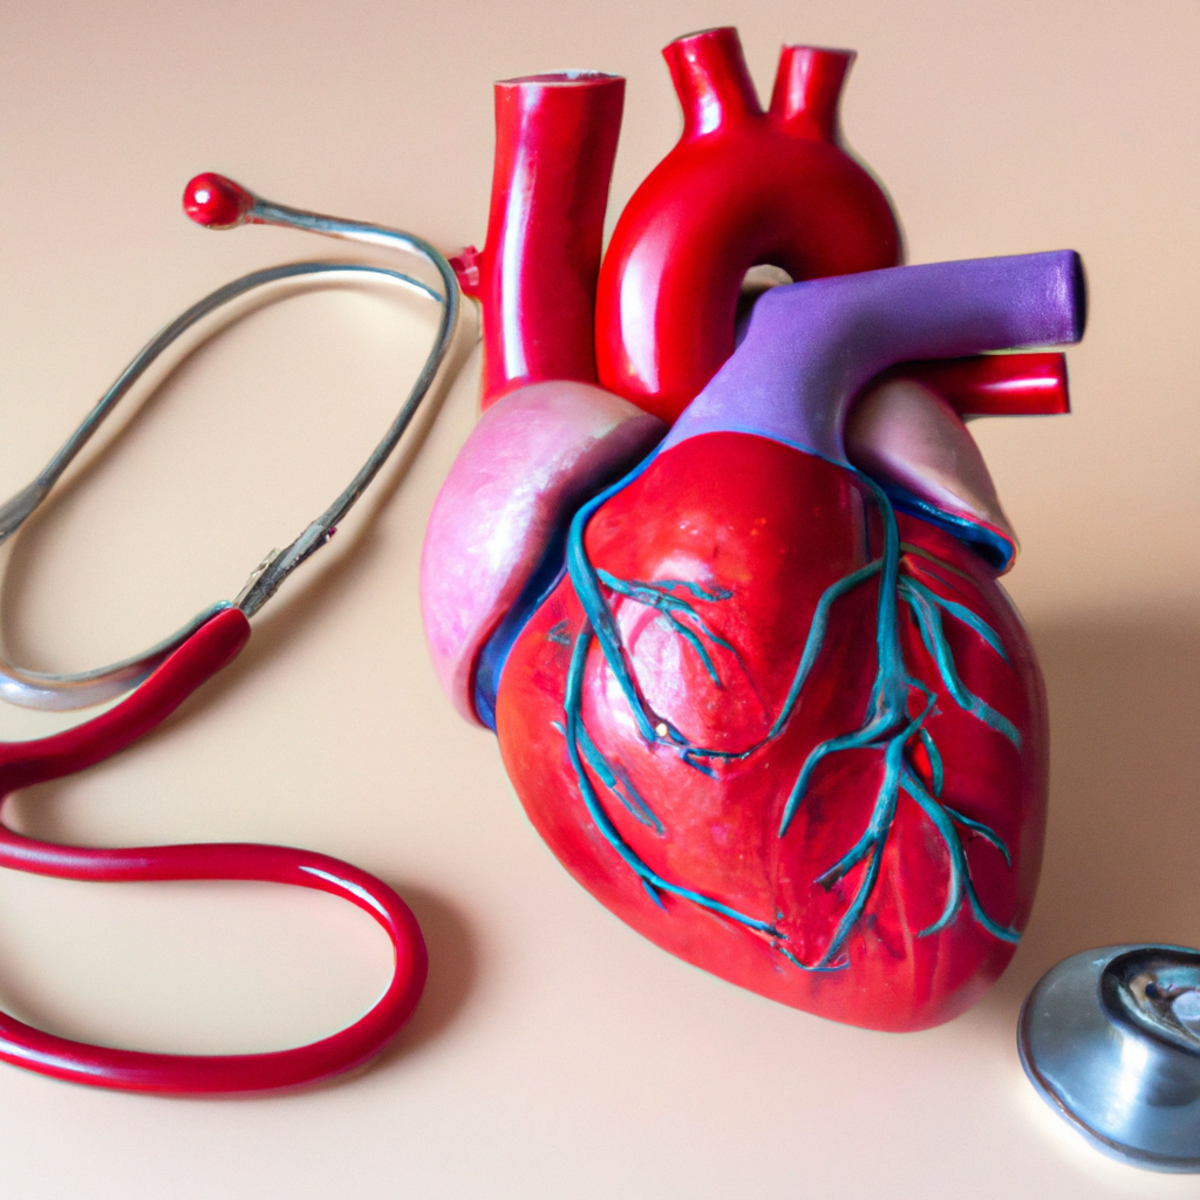 Close-up of anatomically accurate heart model with stethoscope, highlighting Fabry Disease's impact on cardiovascular health - Fabry Disease